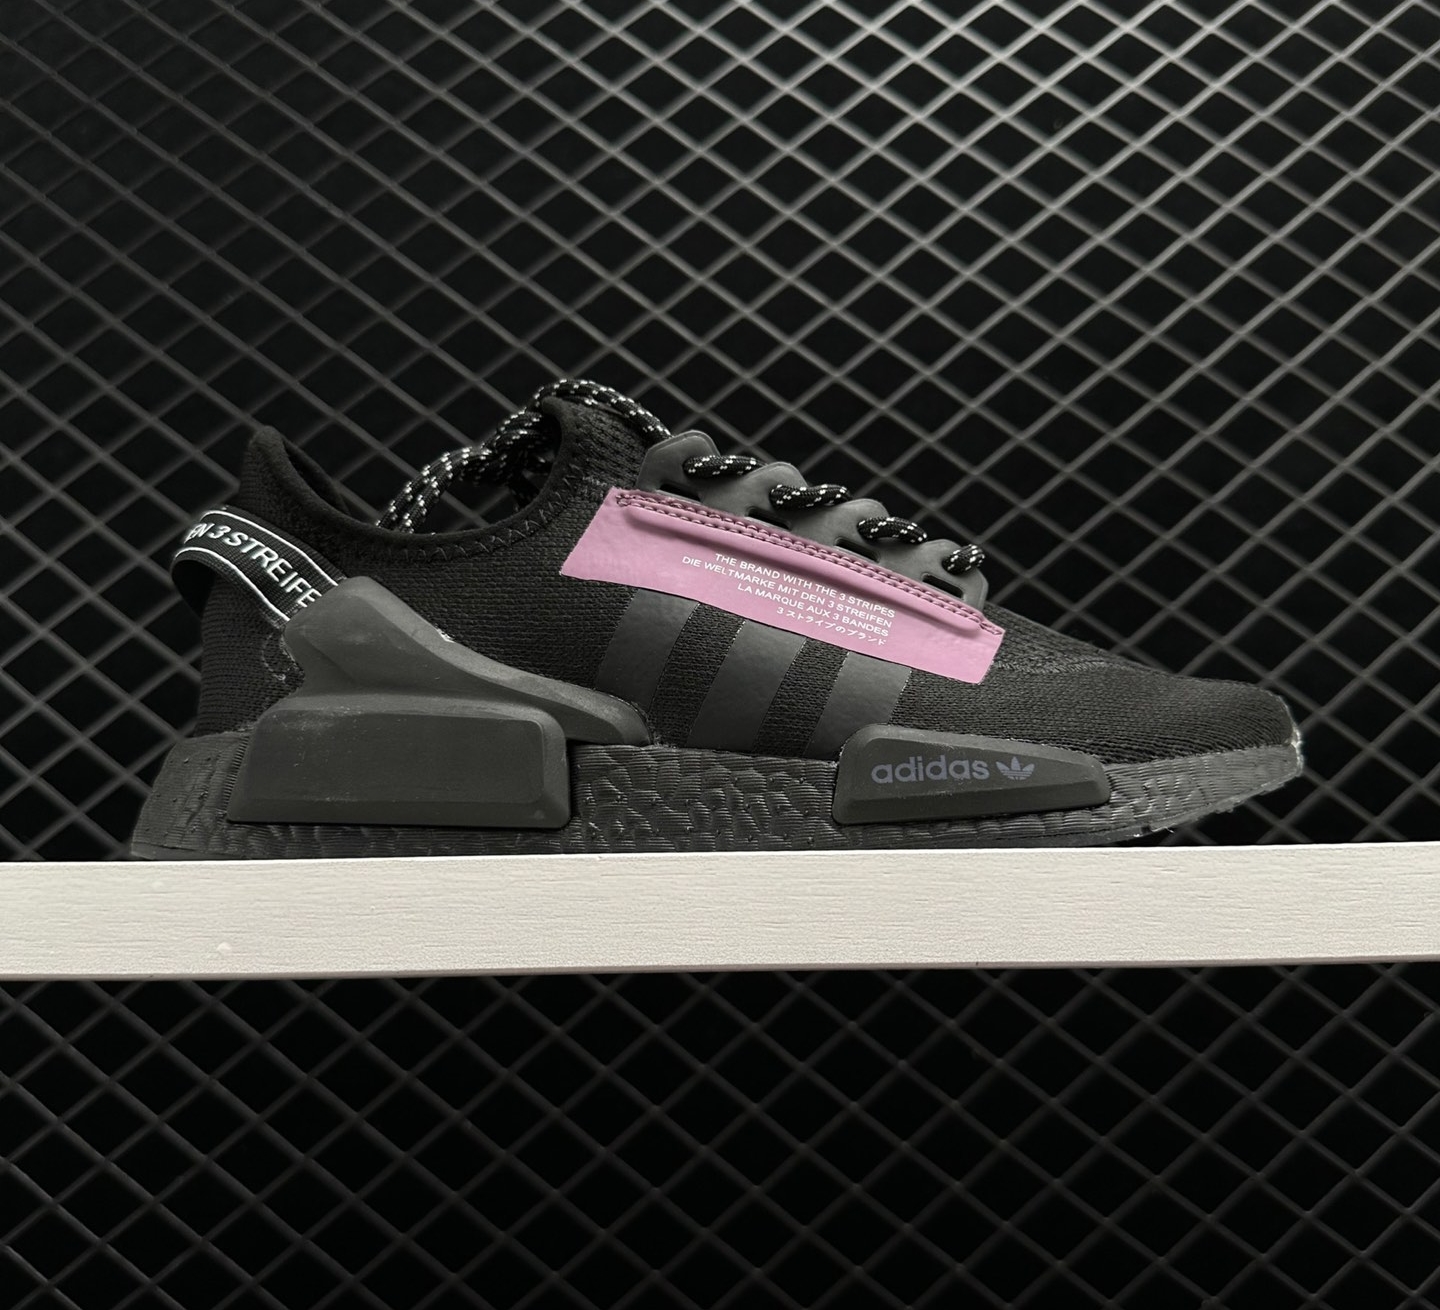 Adidas NMD R1 V2 Black Pink | Trendy Sneakers for Women